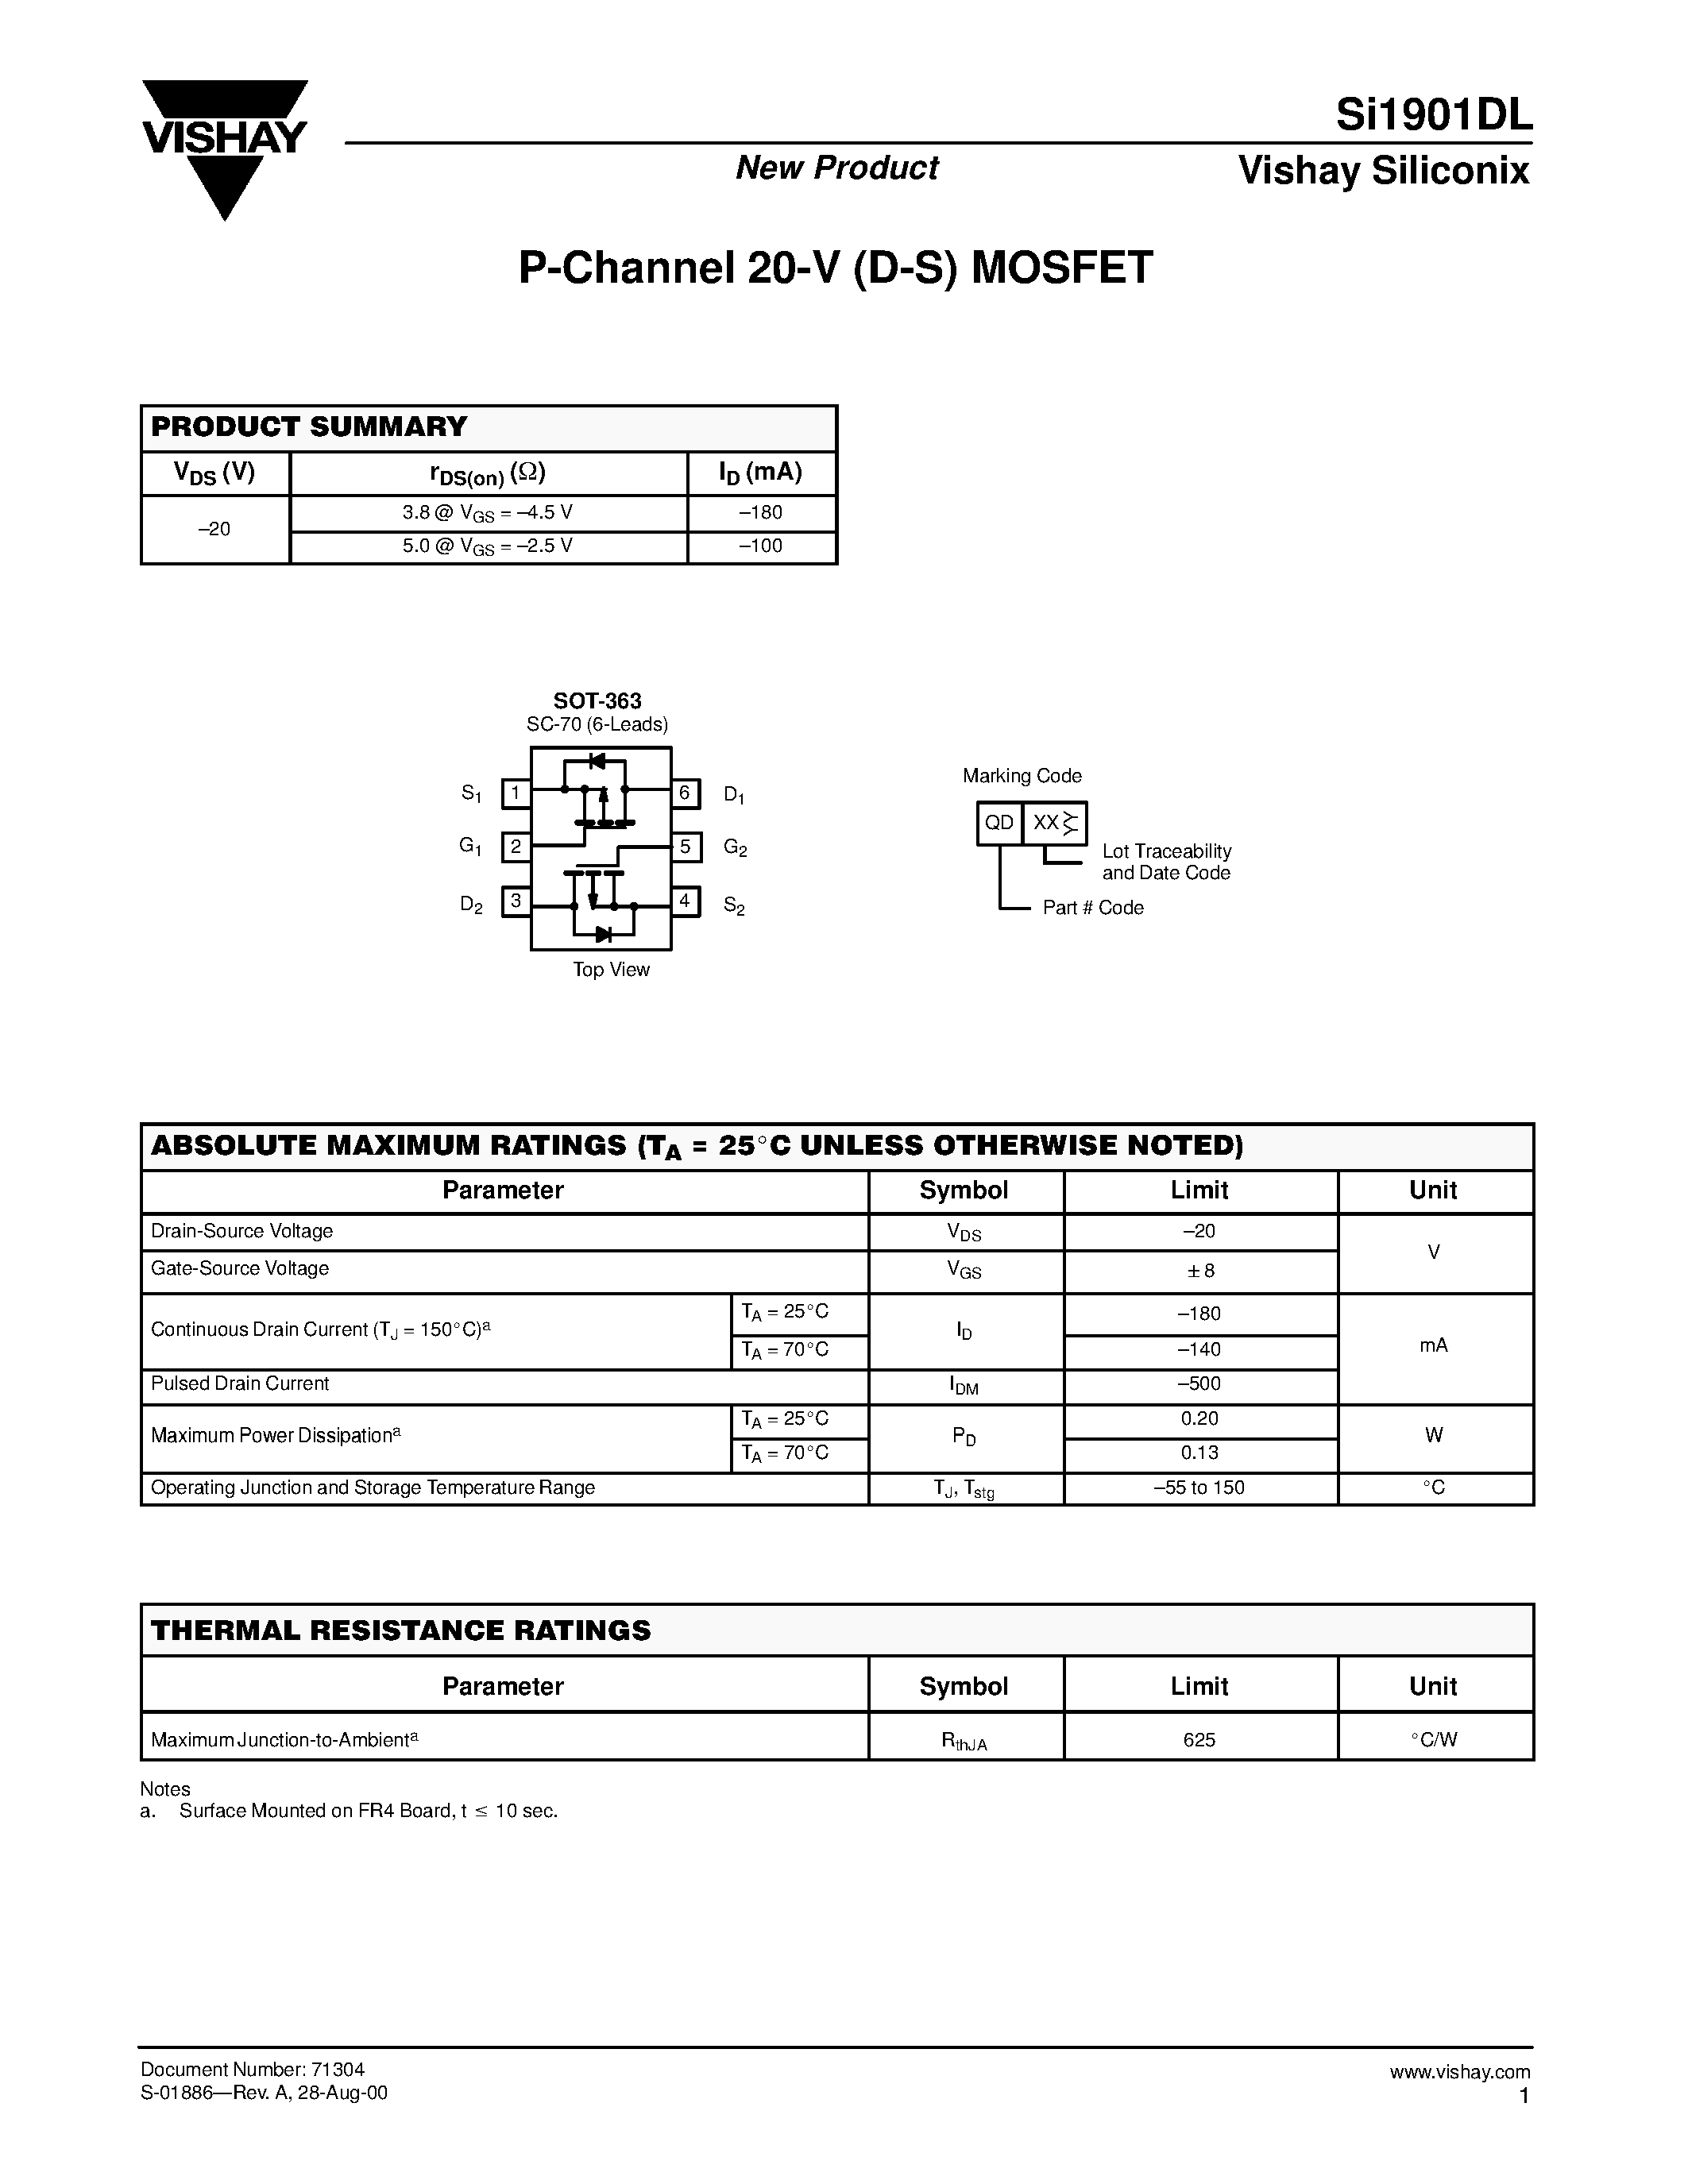 Datasheet SI1901DL - P-Channel 20-V (D-S) MOSFET page 1